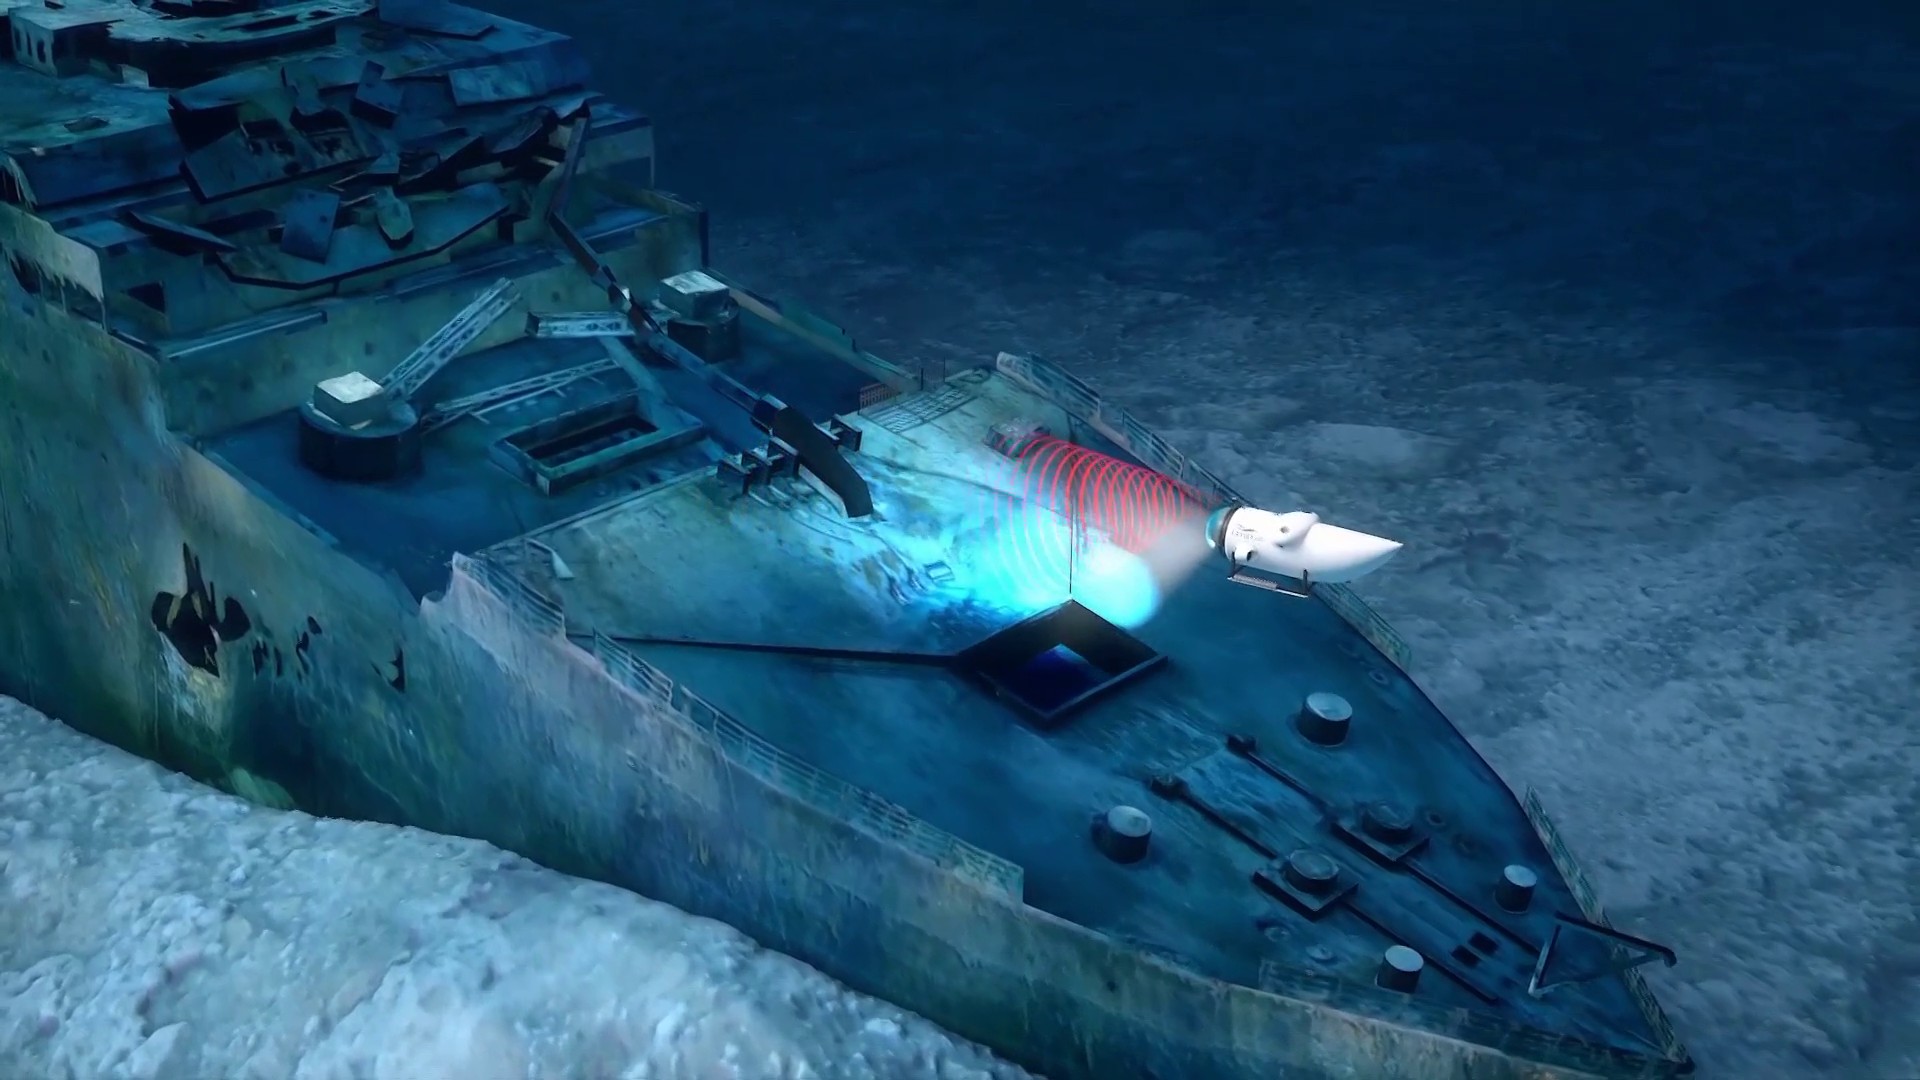 Watch Rare New Footage of the Titanic Wreck, Smart News